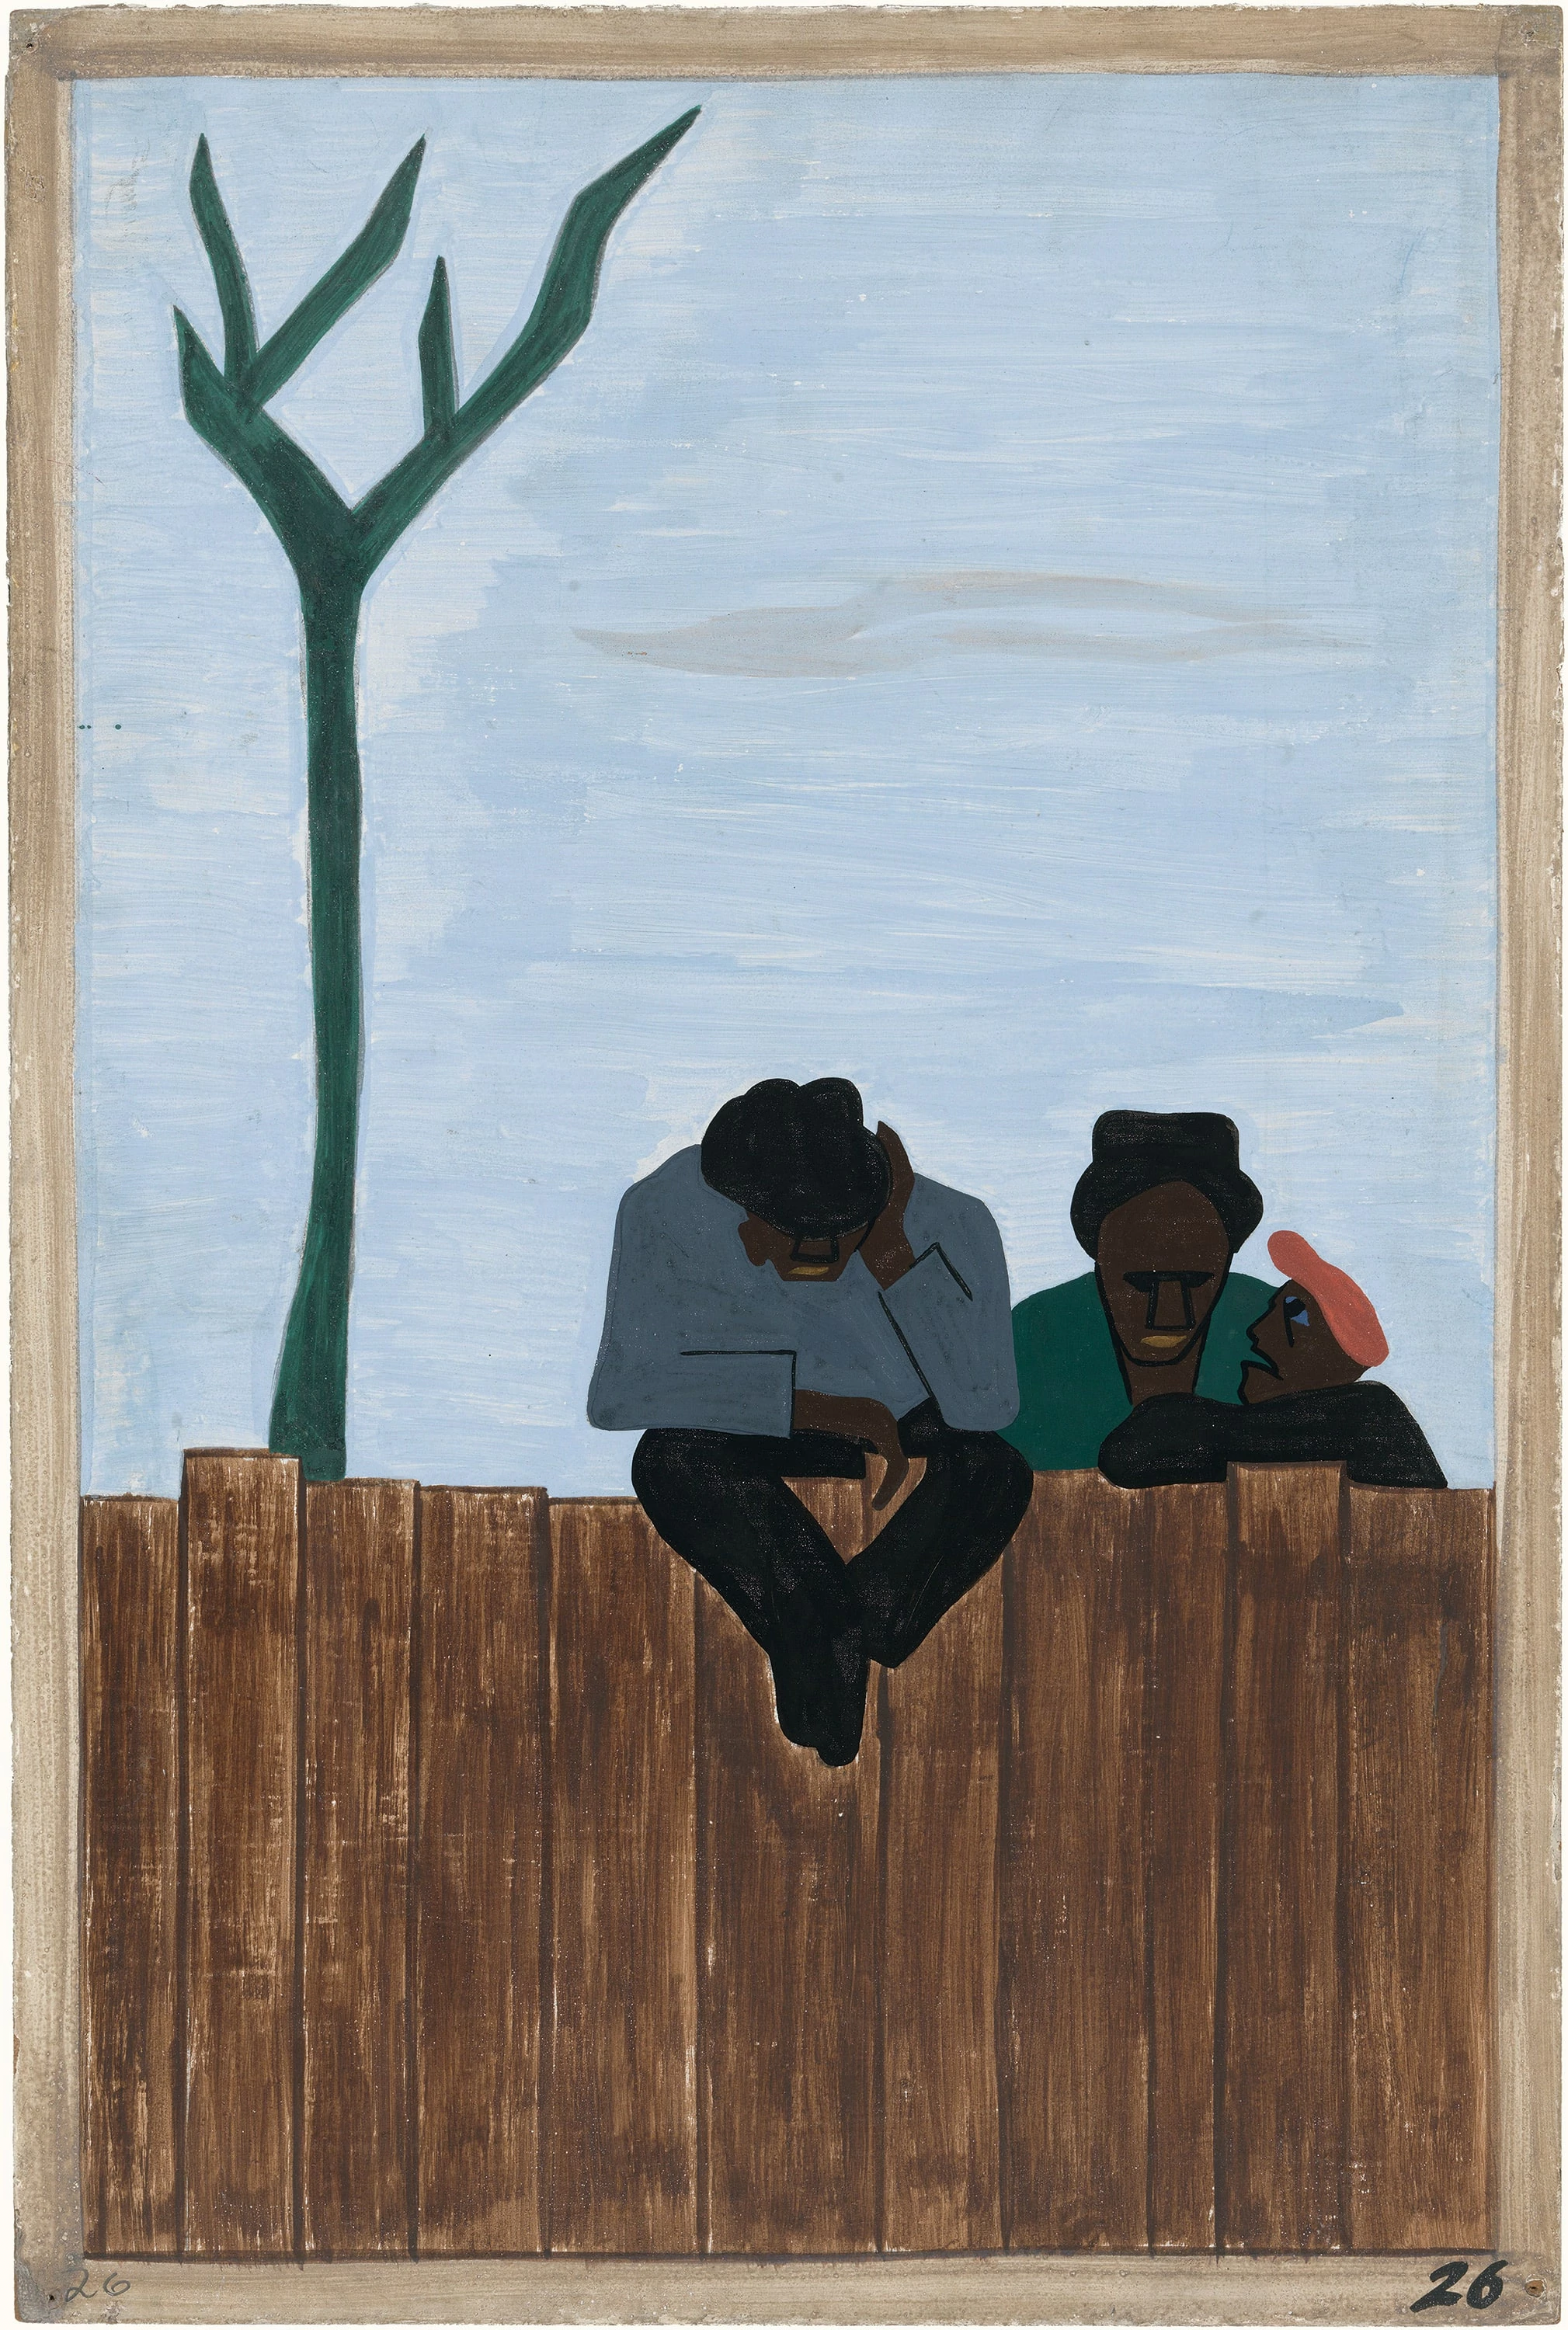 Migration Series No.26:  And people all over the South continued to discuss this great movement, Jacob Lawrence